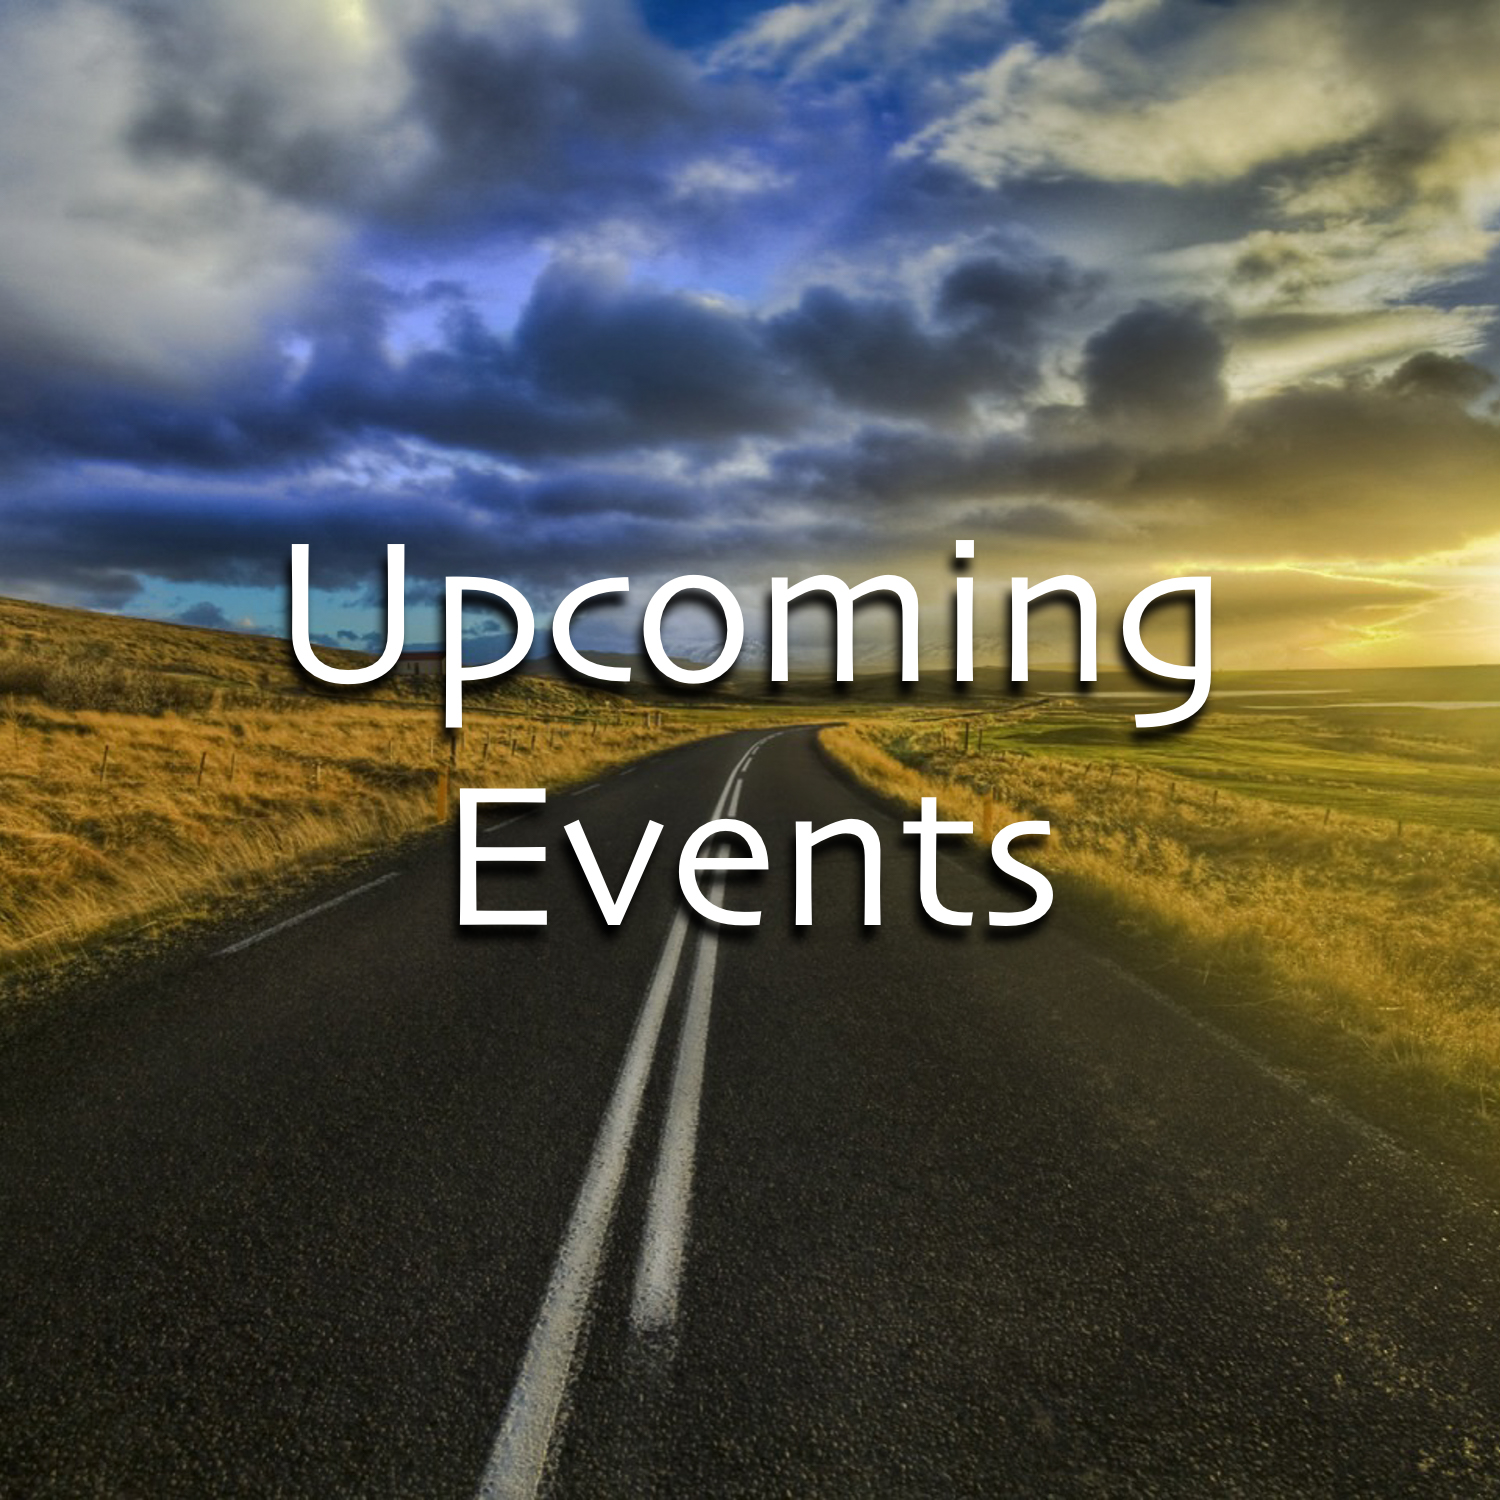 Upcoming Events - Hope to see you there!